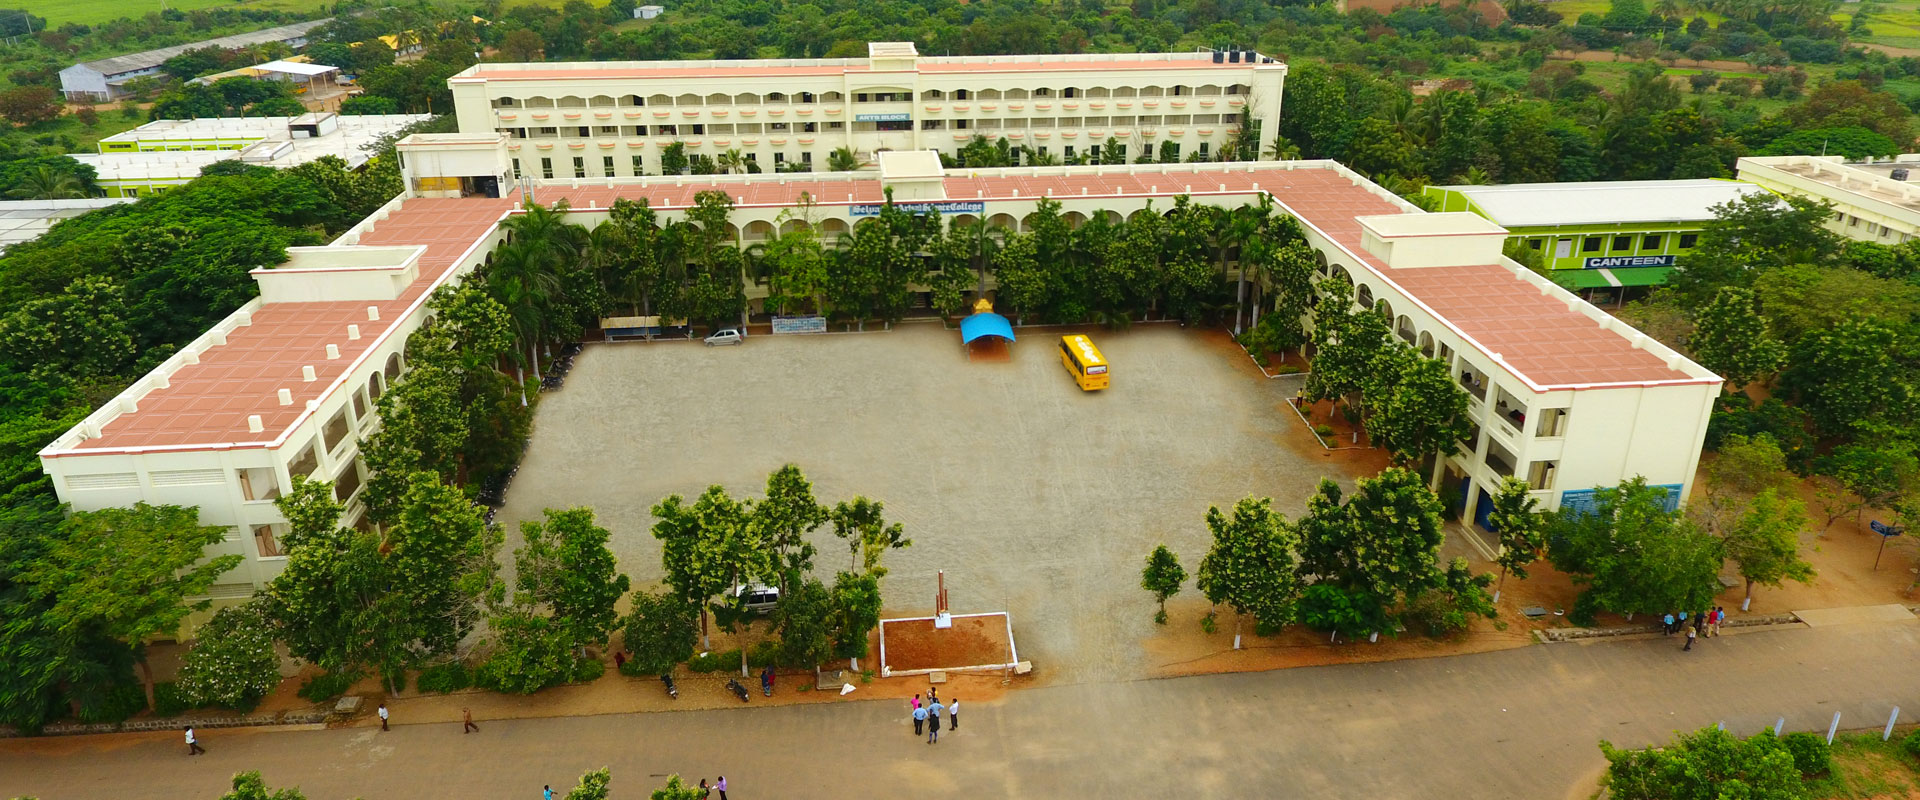 Selvamm Arts and Science College, Namakkal Image